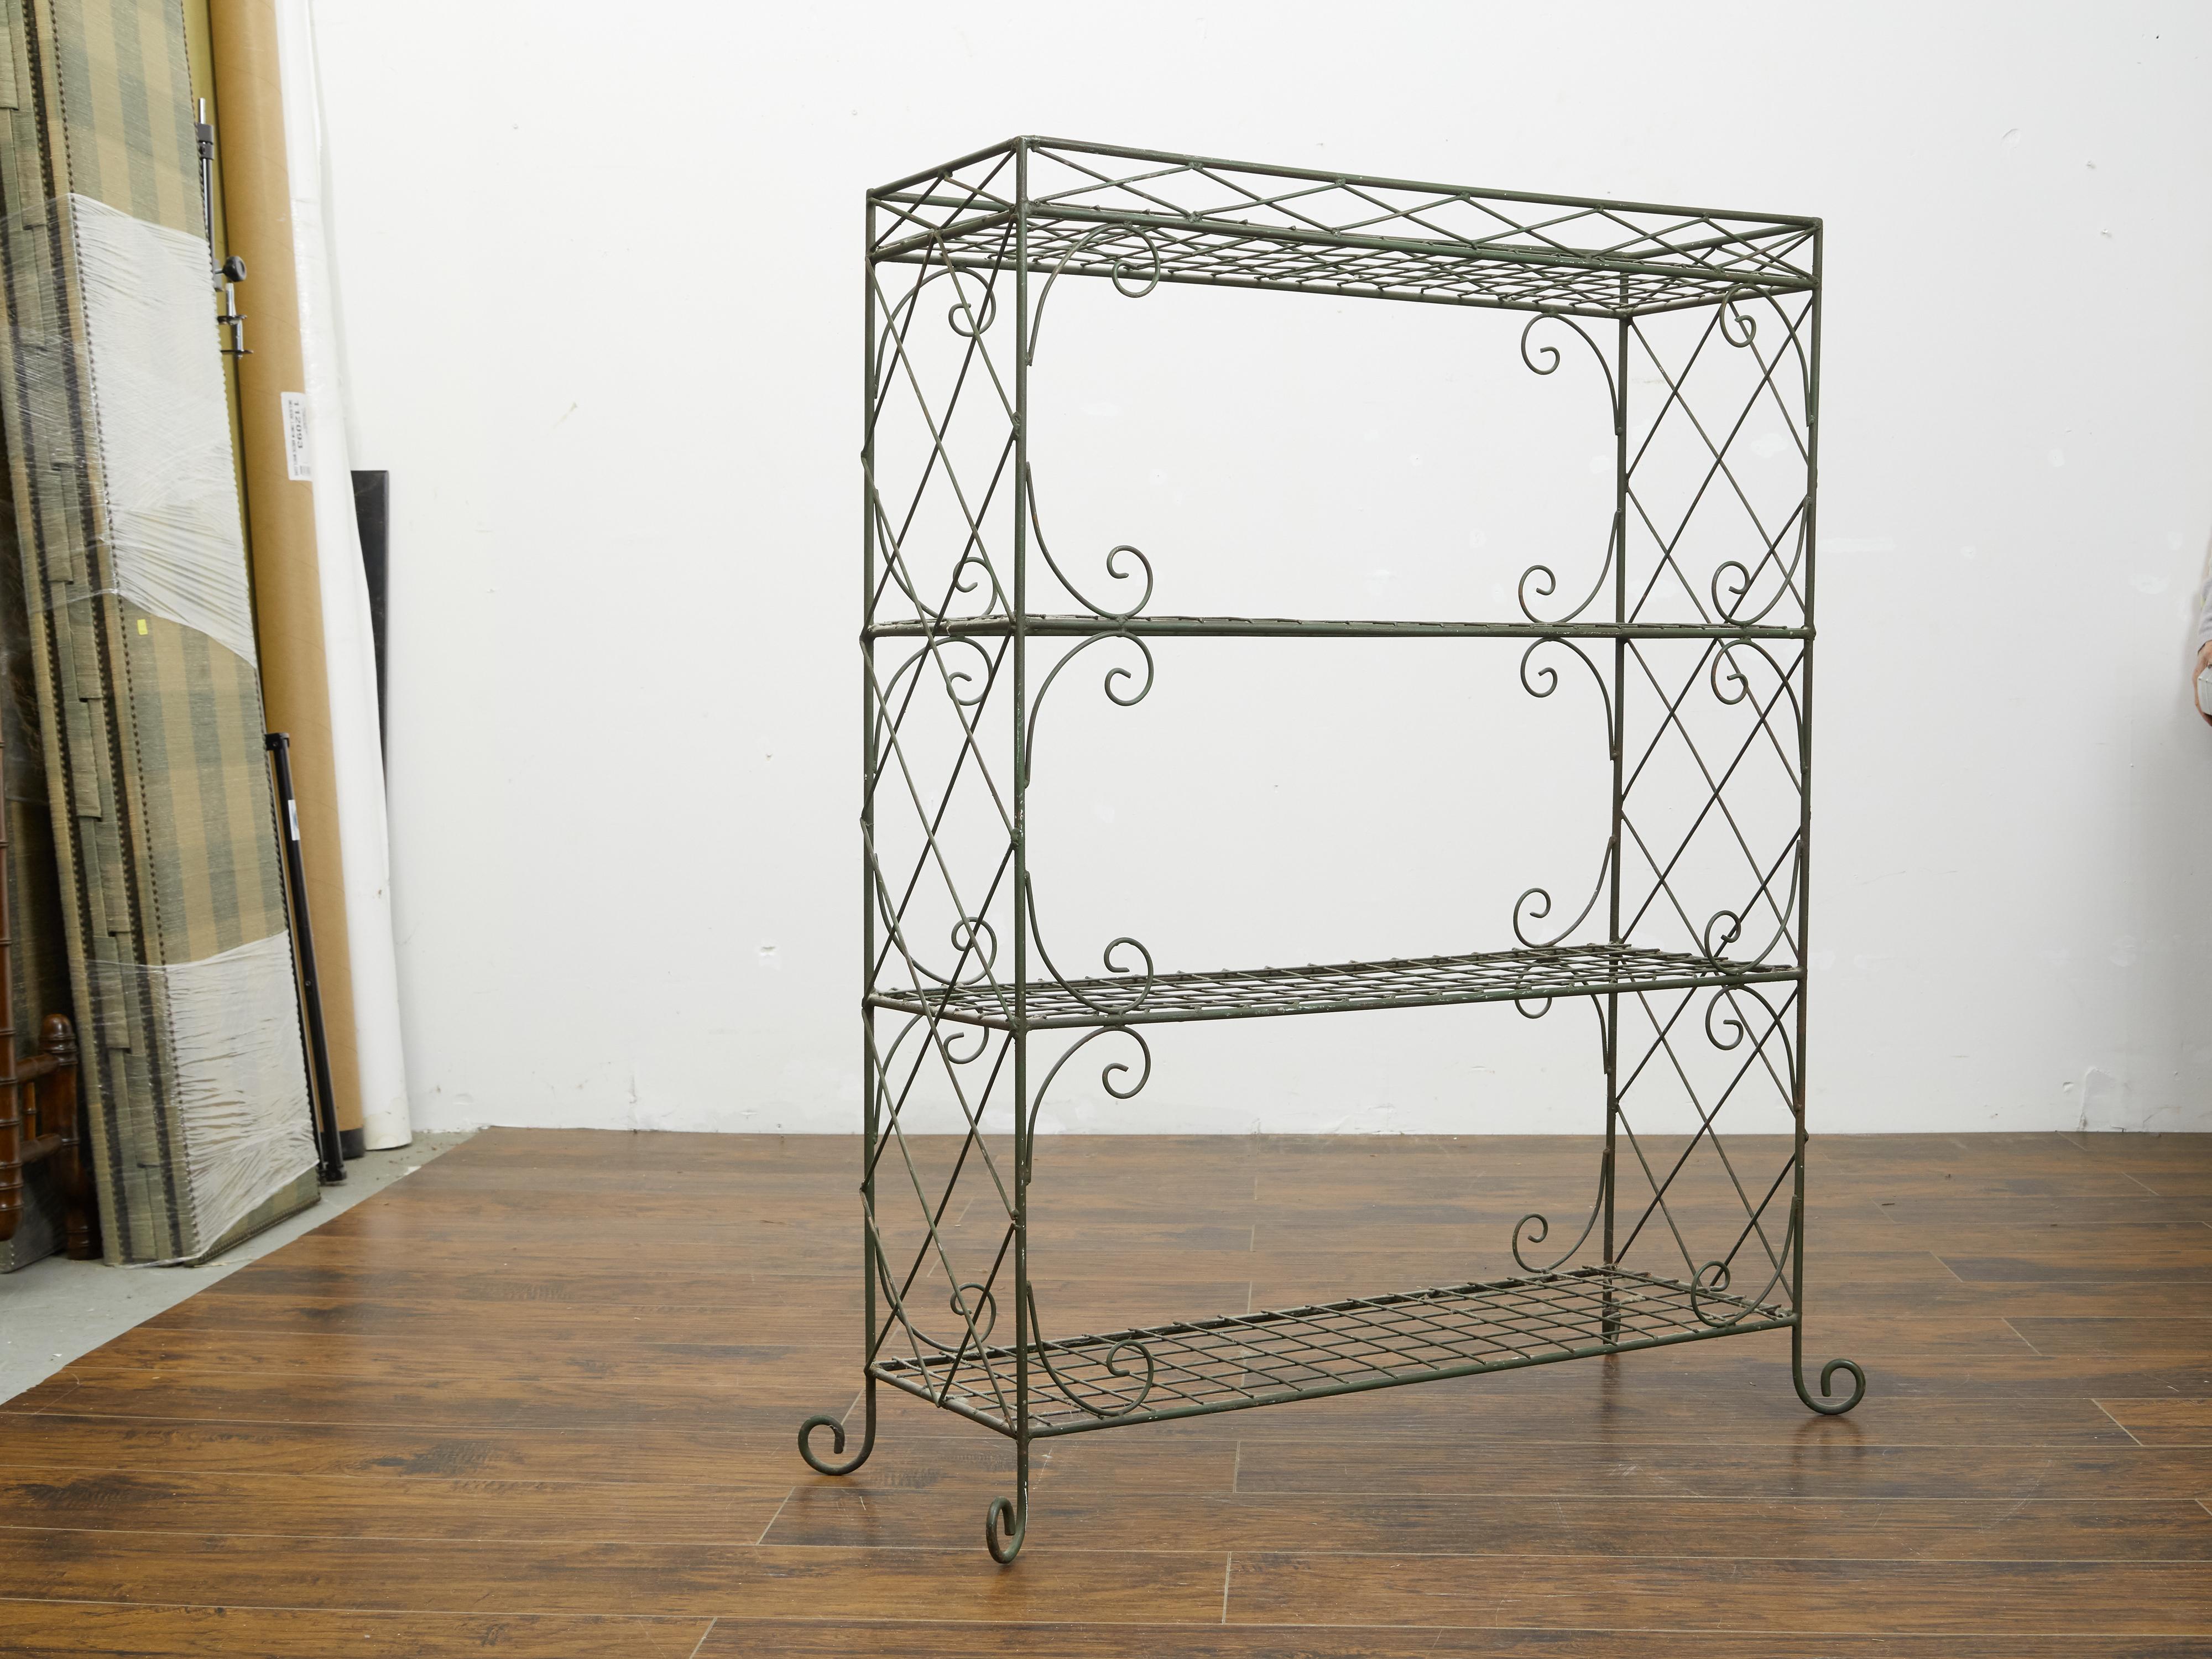 A vintage French wire freestanding shelf from the mid 20th century, with scrolling accents. Created in France during the midcentury period, this shelf attracts our attention with its wire structure adorned with diamond motifs and C-scrolls. Resting